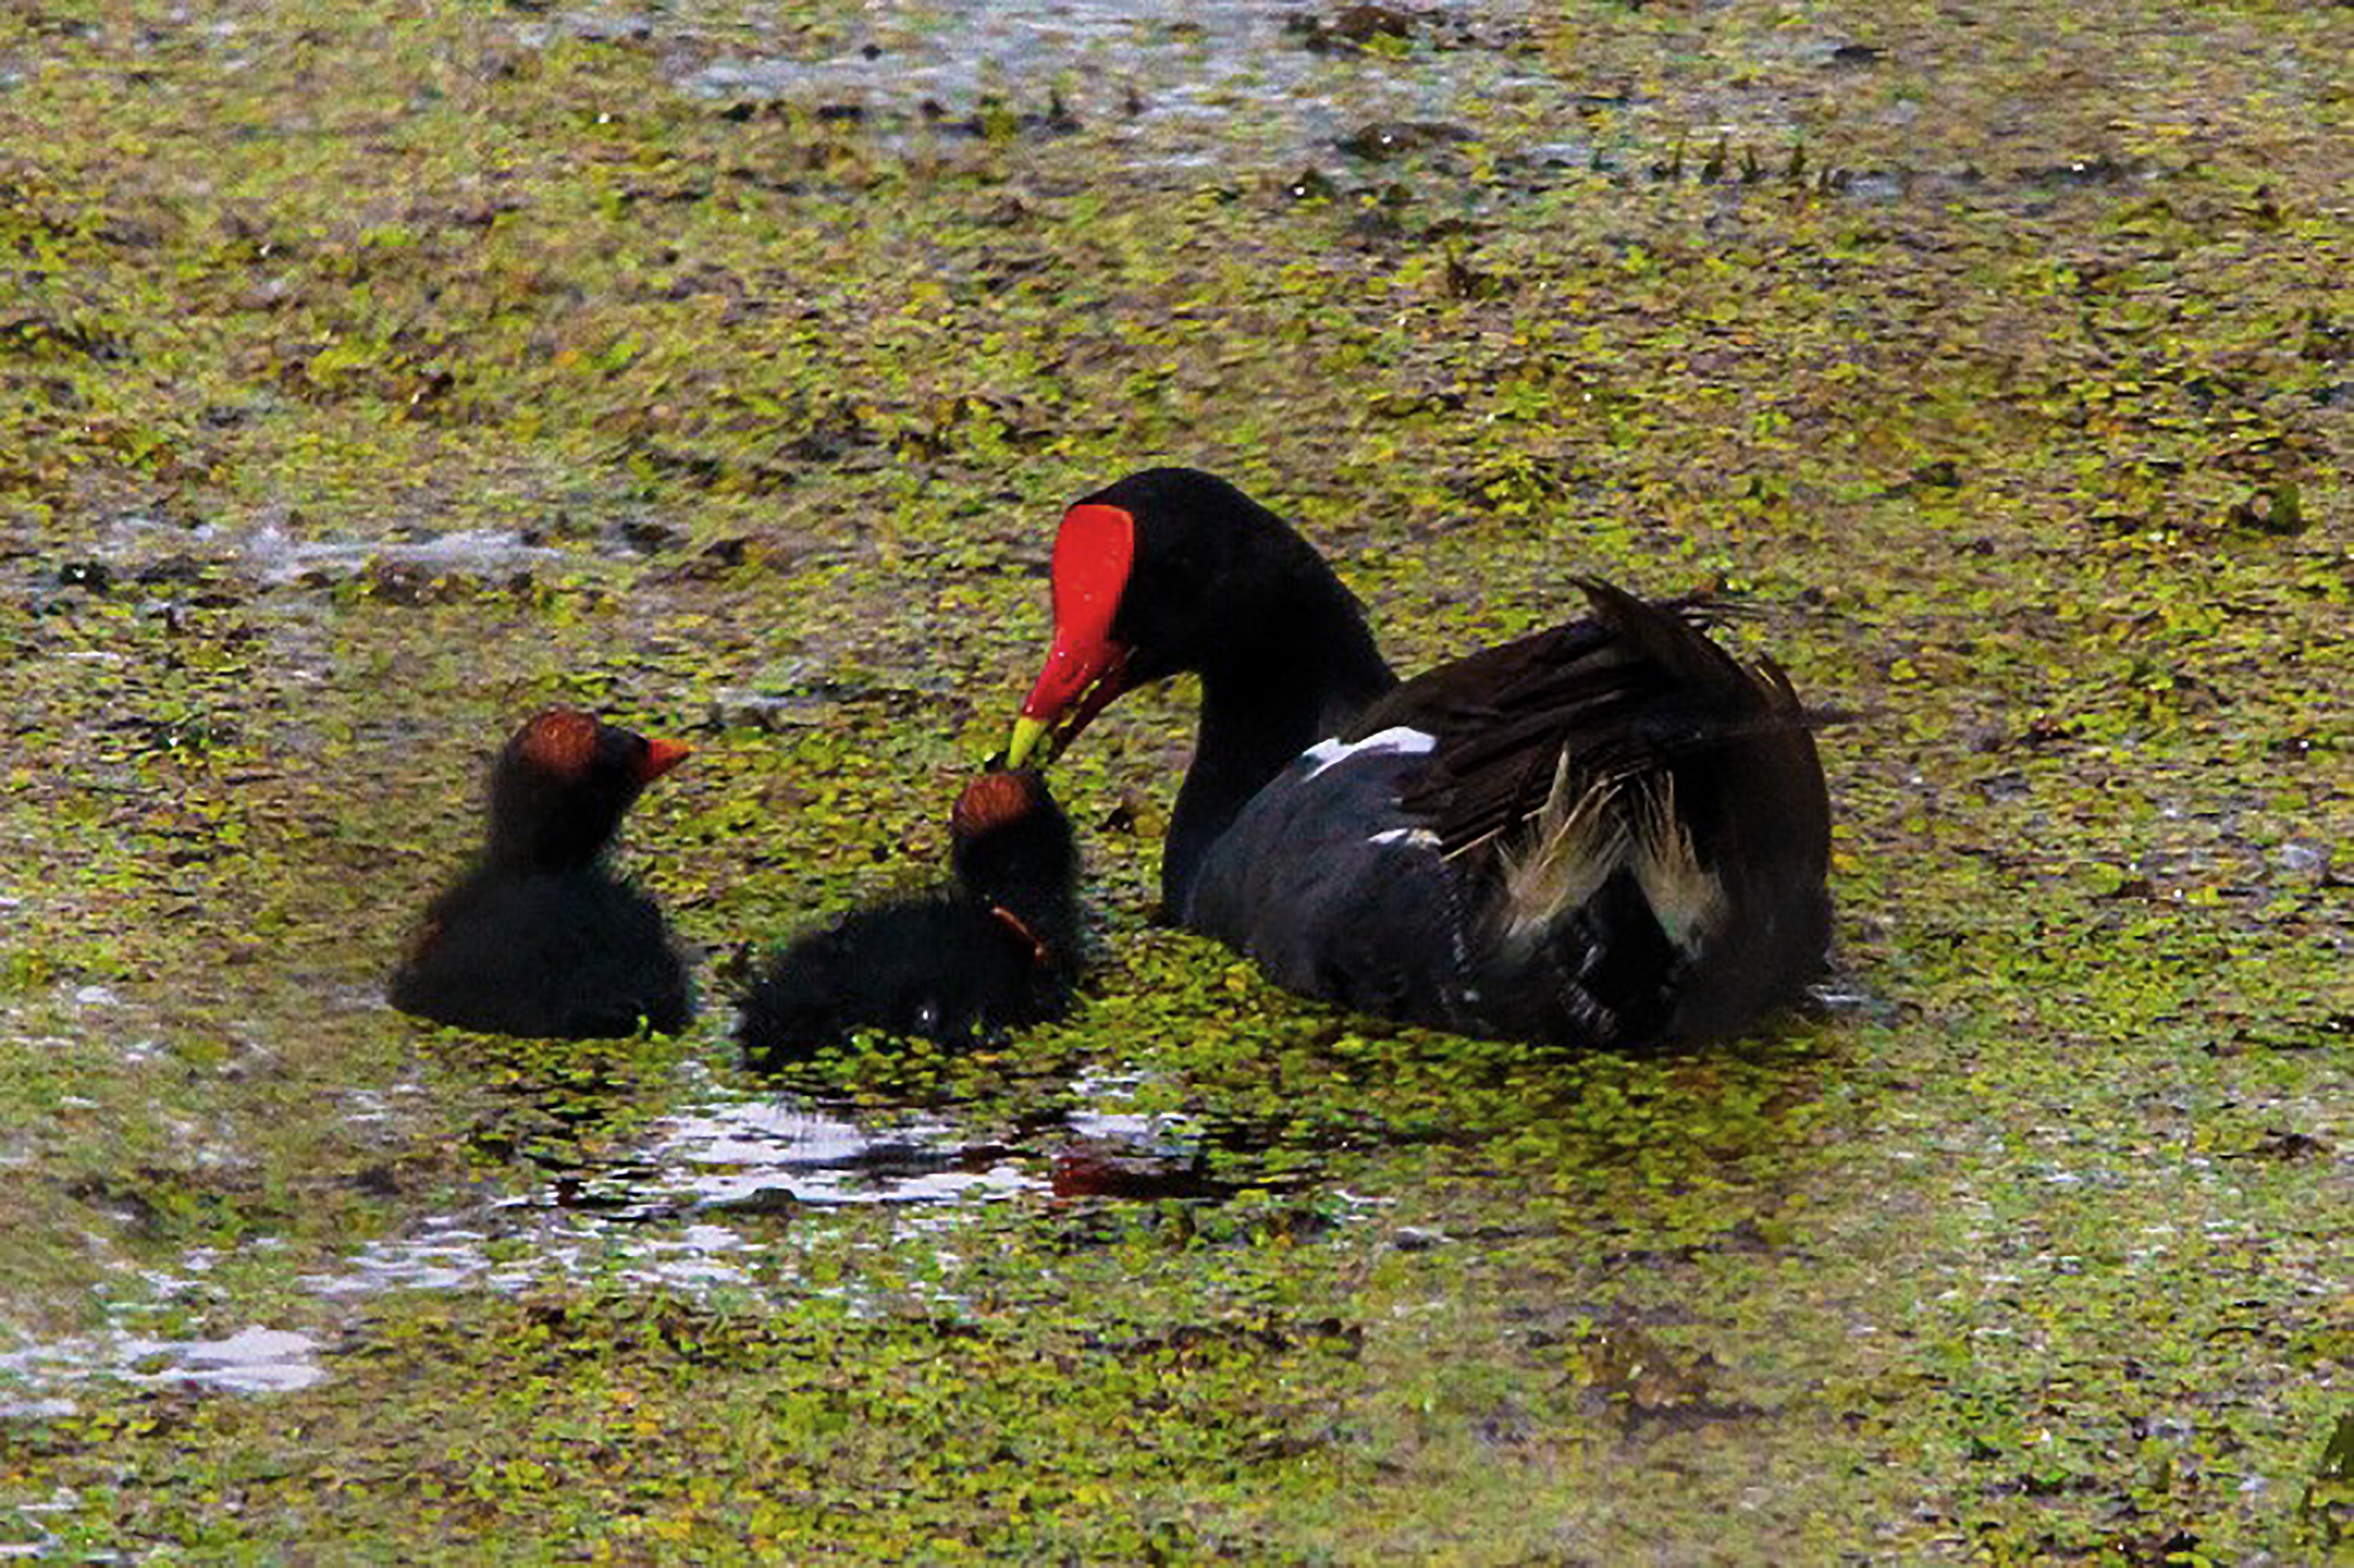 Waterfowl in the water, mother and chicks